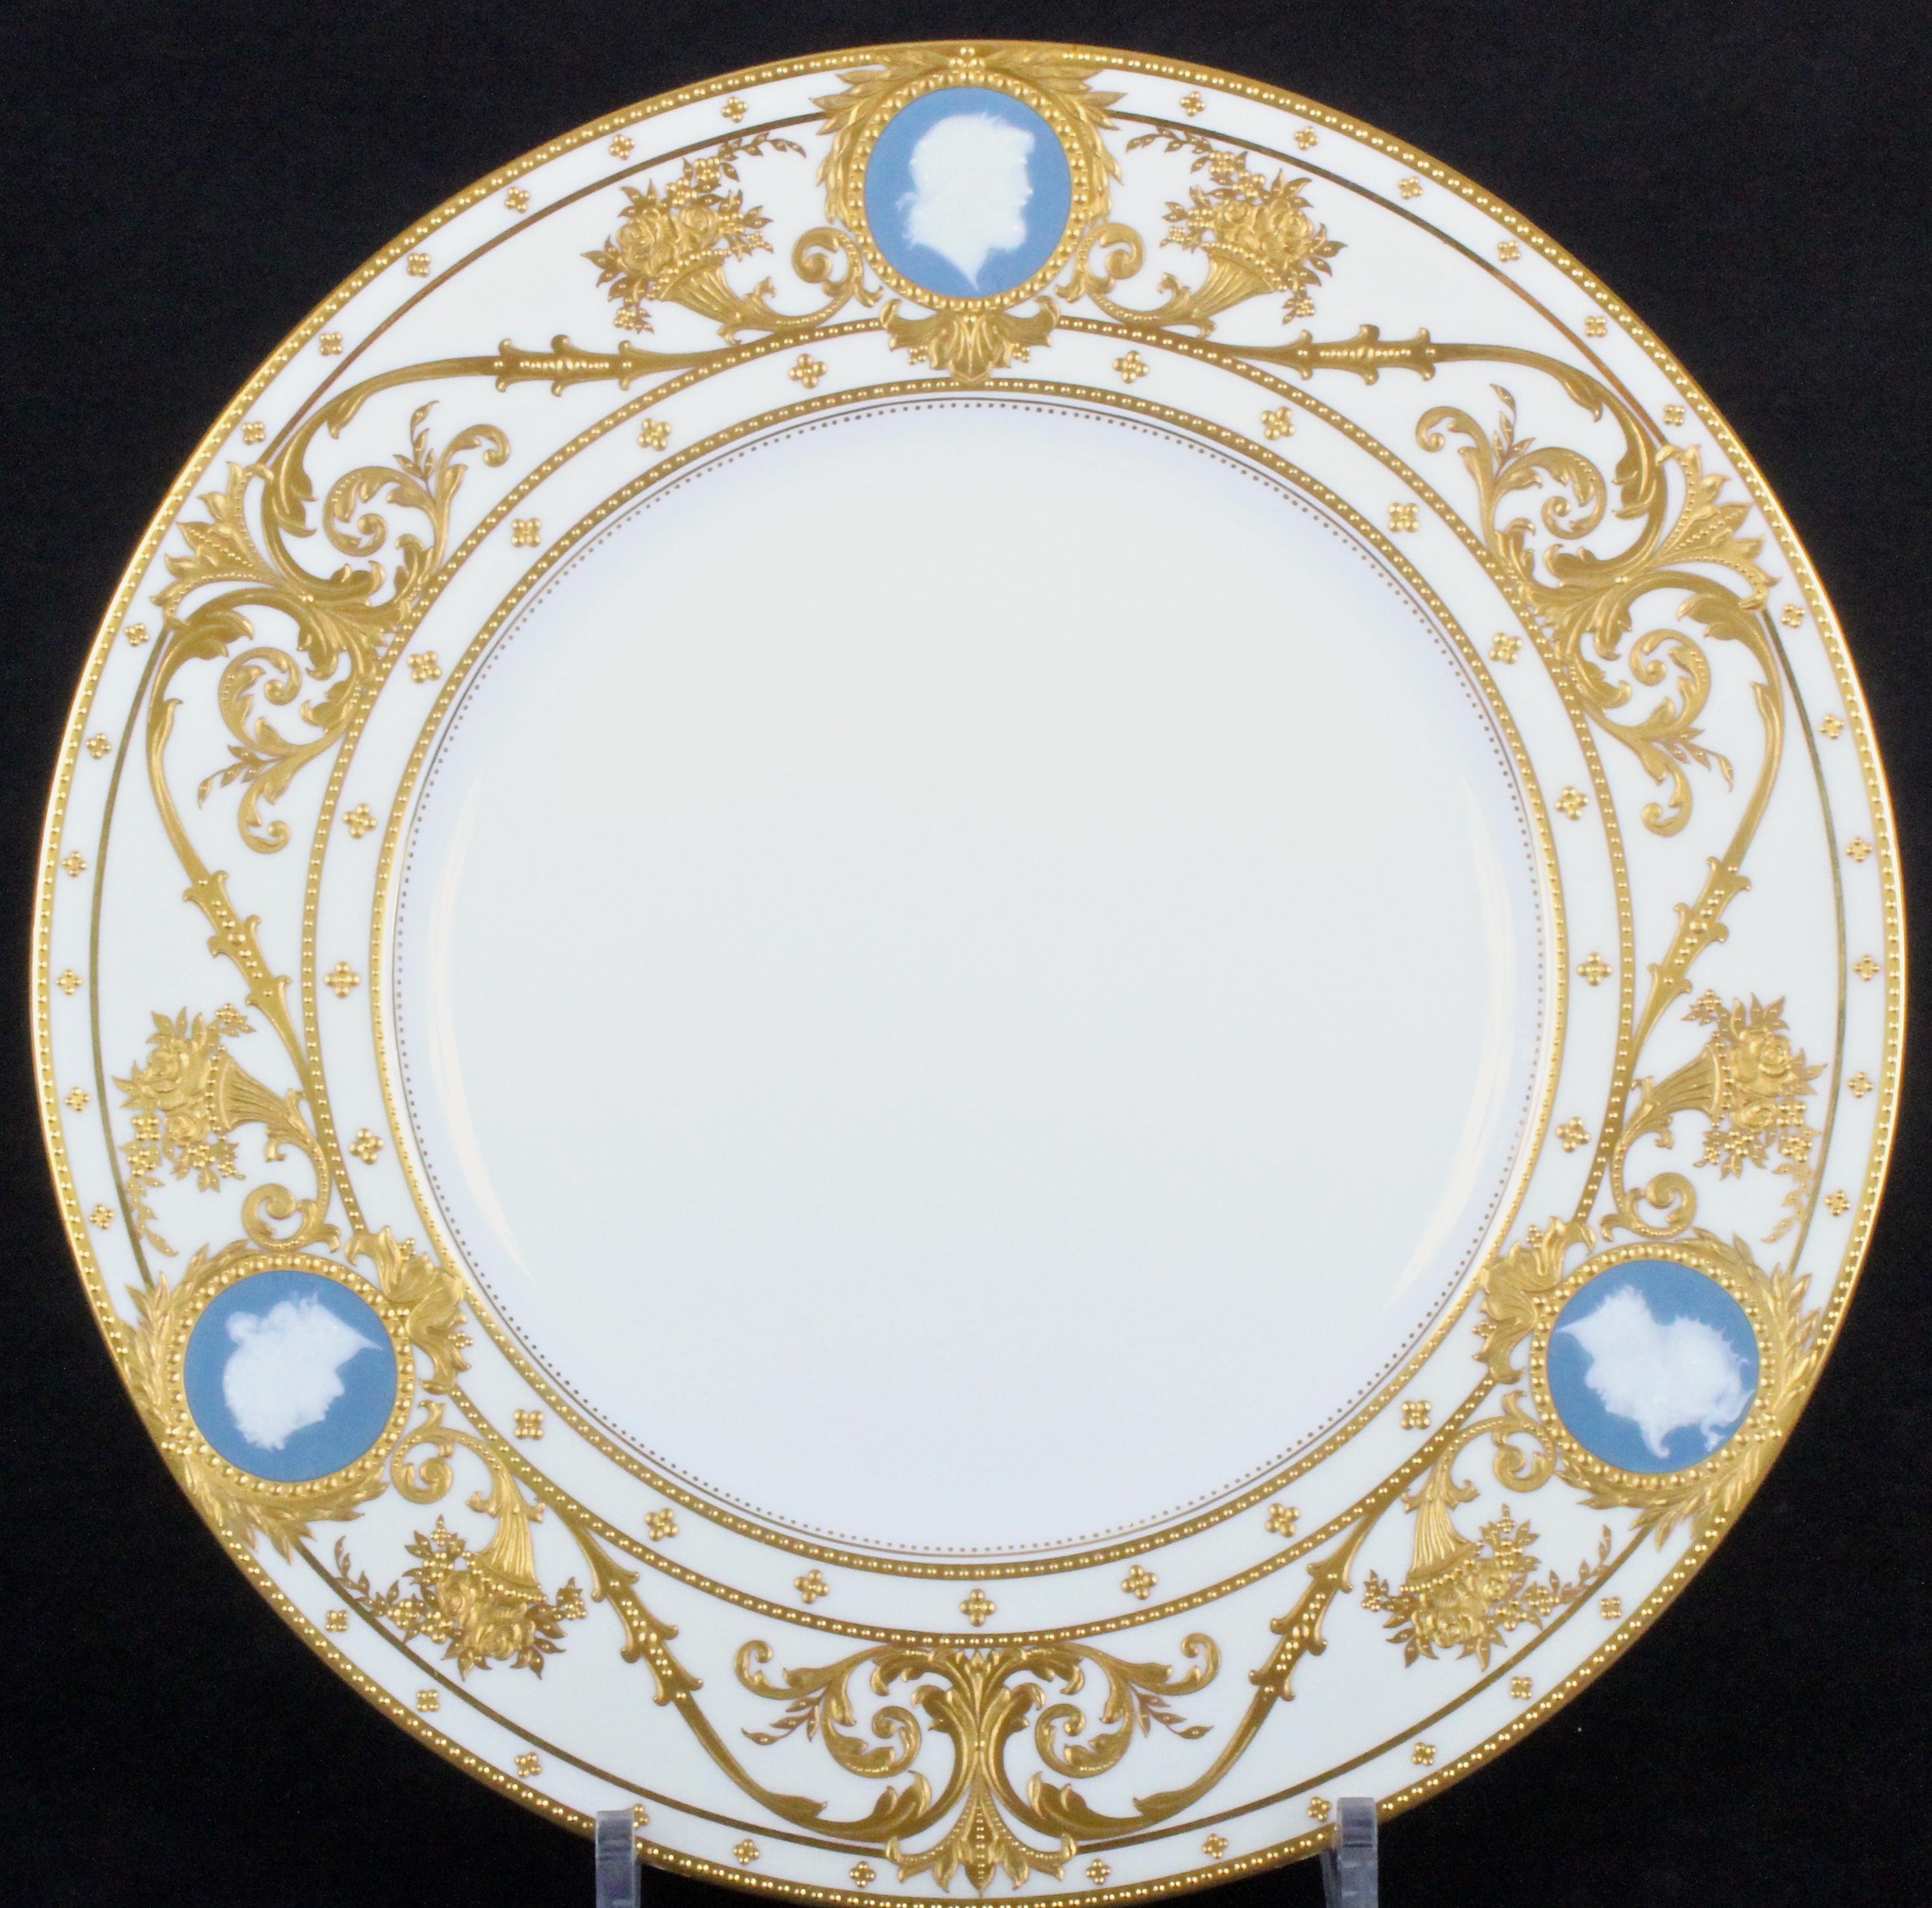 Neoclassical 12 Minton Pate-sur-Pate Cameo Plates for Tiffany, by Artist Albion Birks For Sale